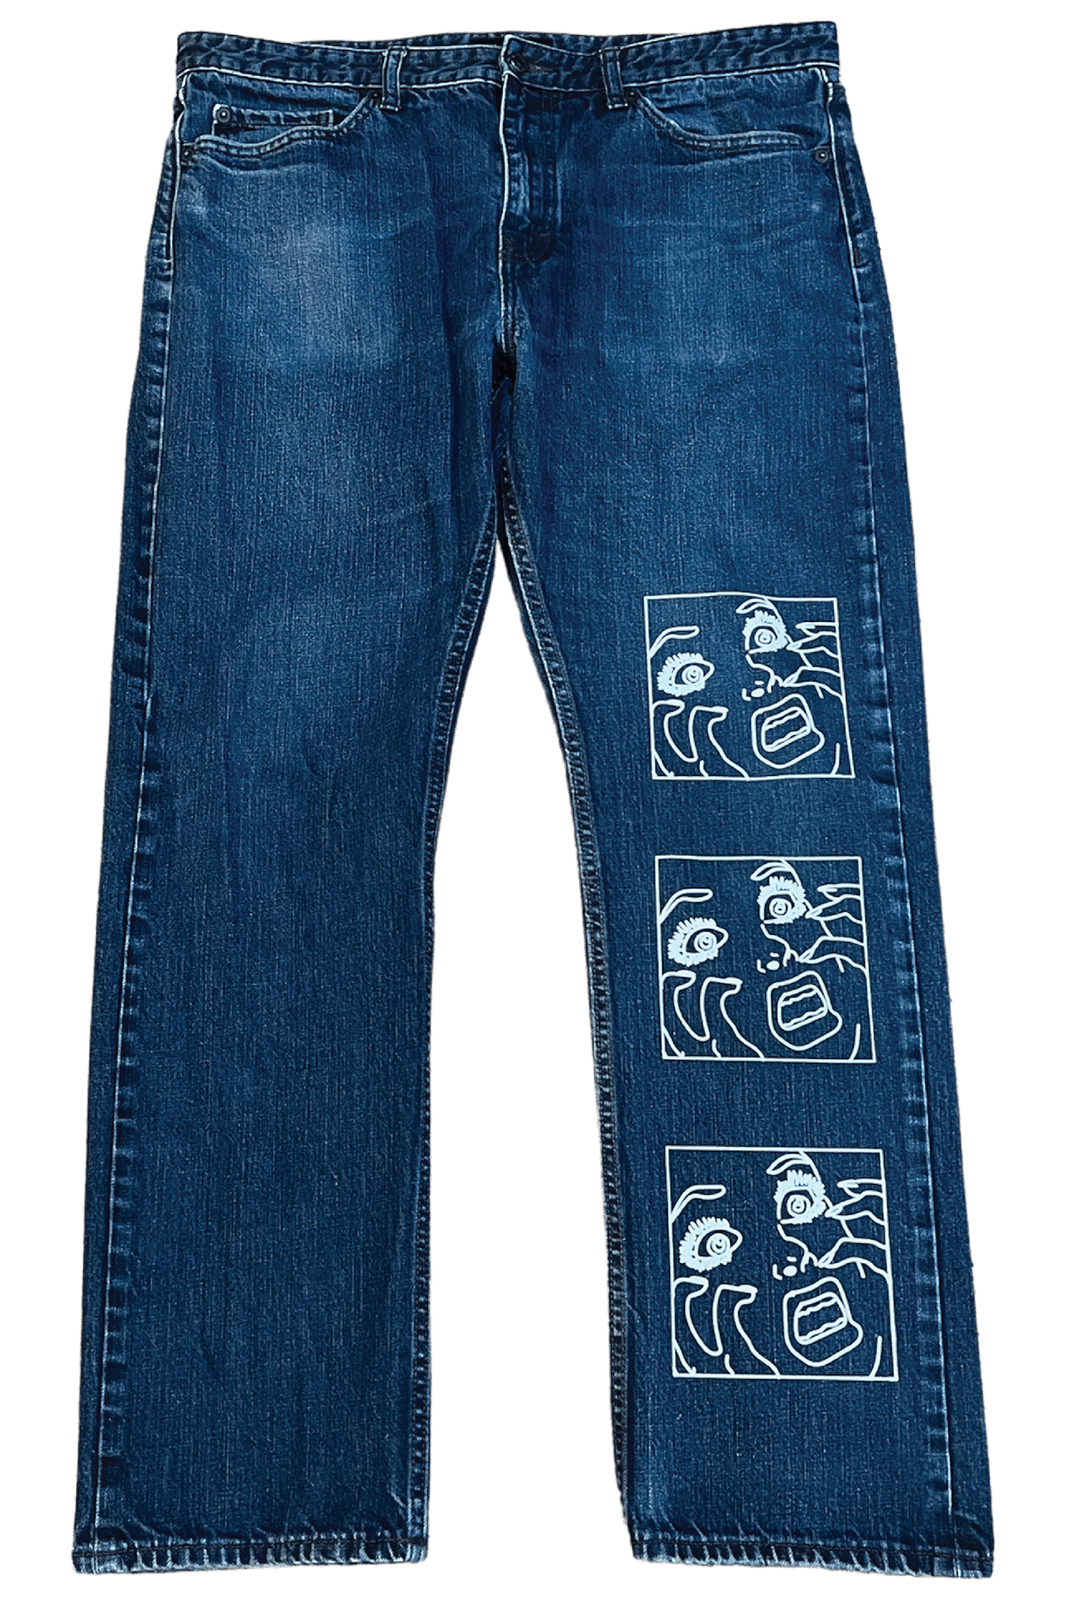 Wrangler® Relaxed Fit Jeans for Company Uniform Programs